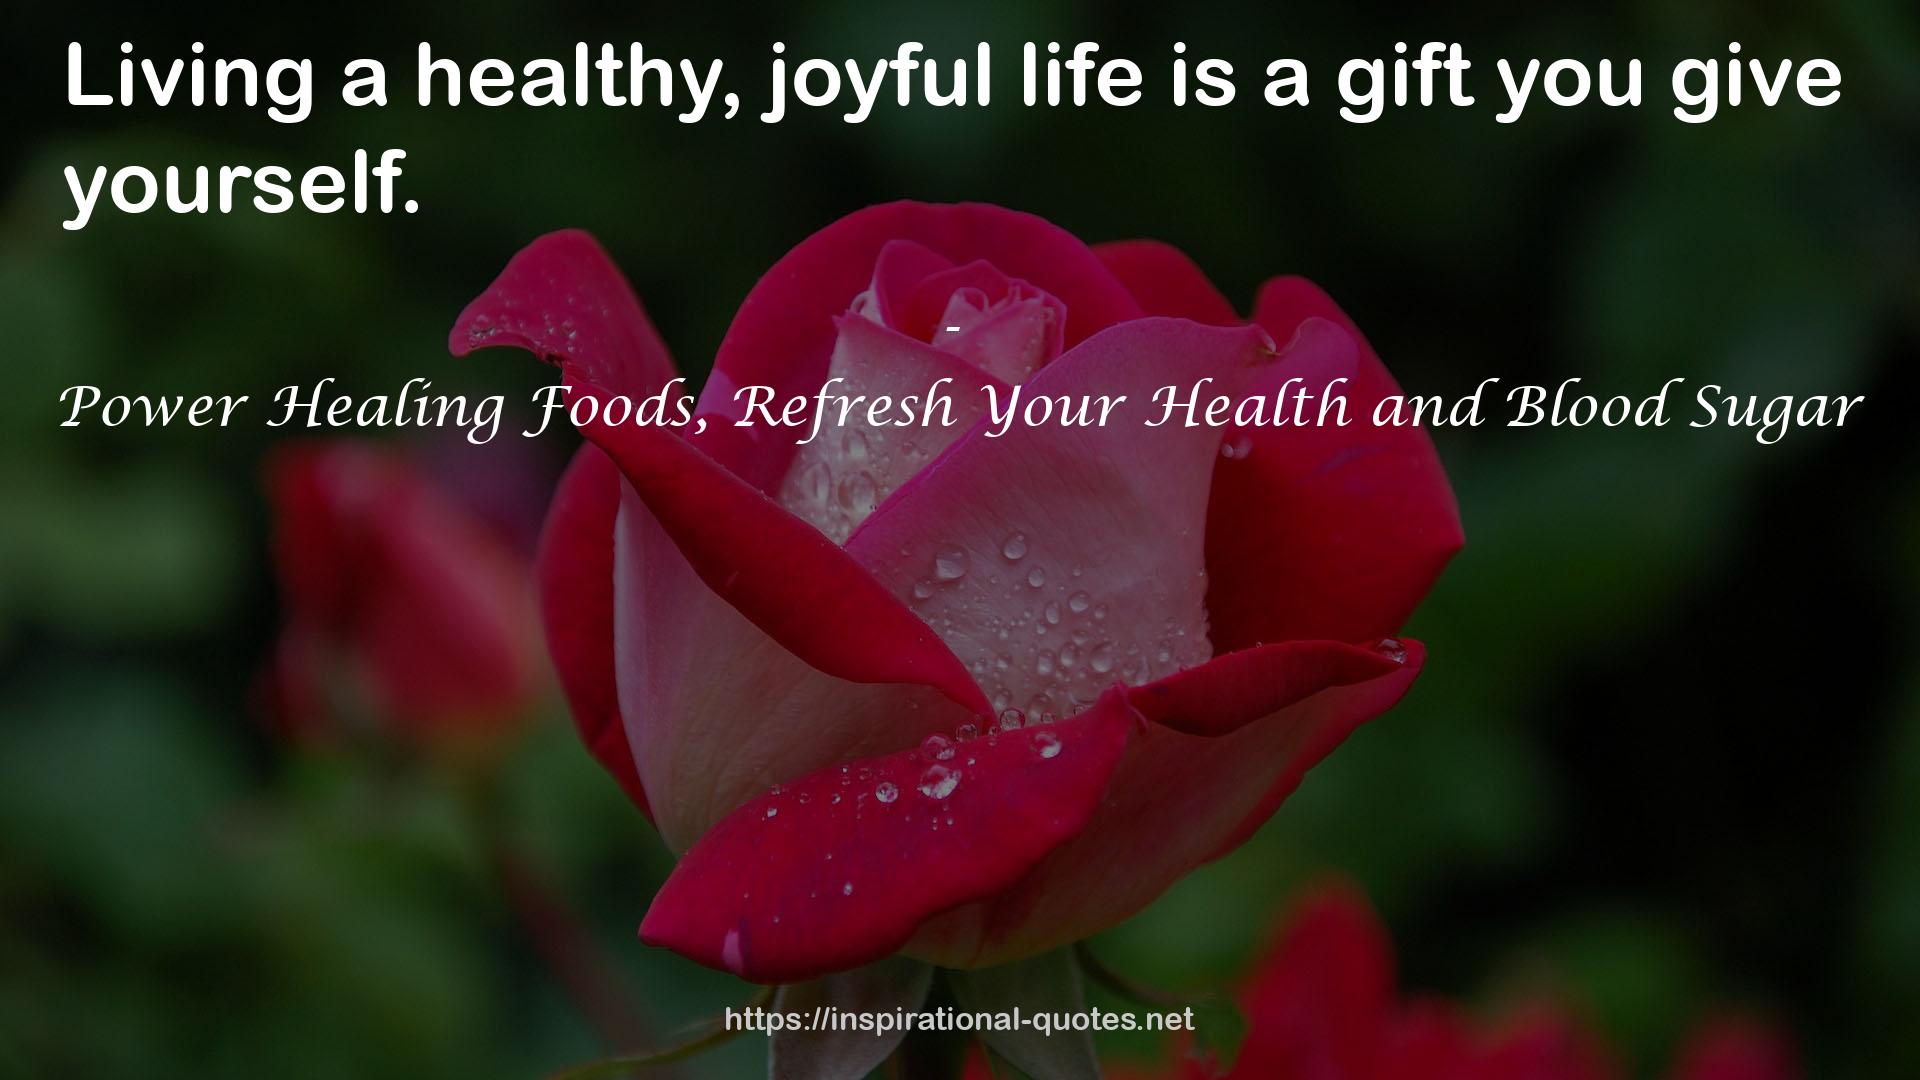 Power Healing Foods, Refresh Your Health and Blood Sugar QUOTES